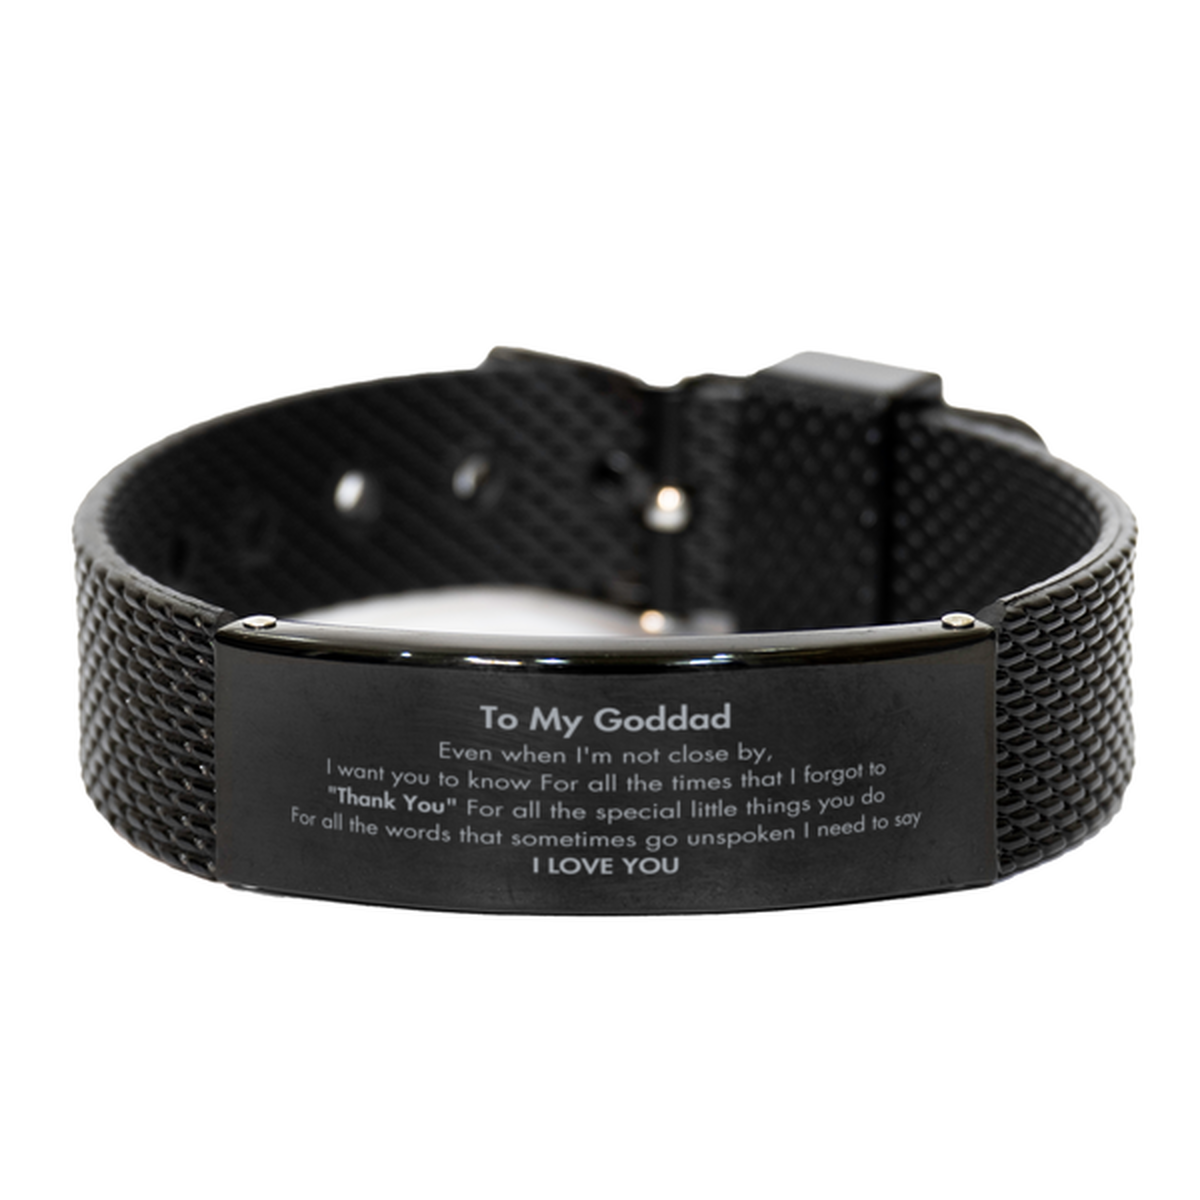 Thank You Gifts for Goddad, Keepsake Black Shark Mesh Bracelet Gifts for Goddad Birthday Mother's day Father's Day Goddad For all the words That sometimes go unspoken I need to say I LOVE YOU